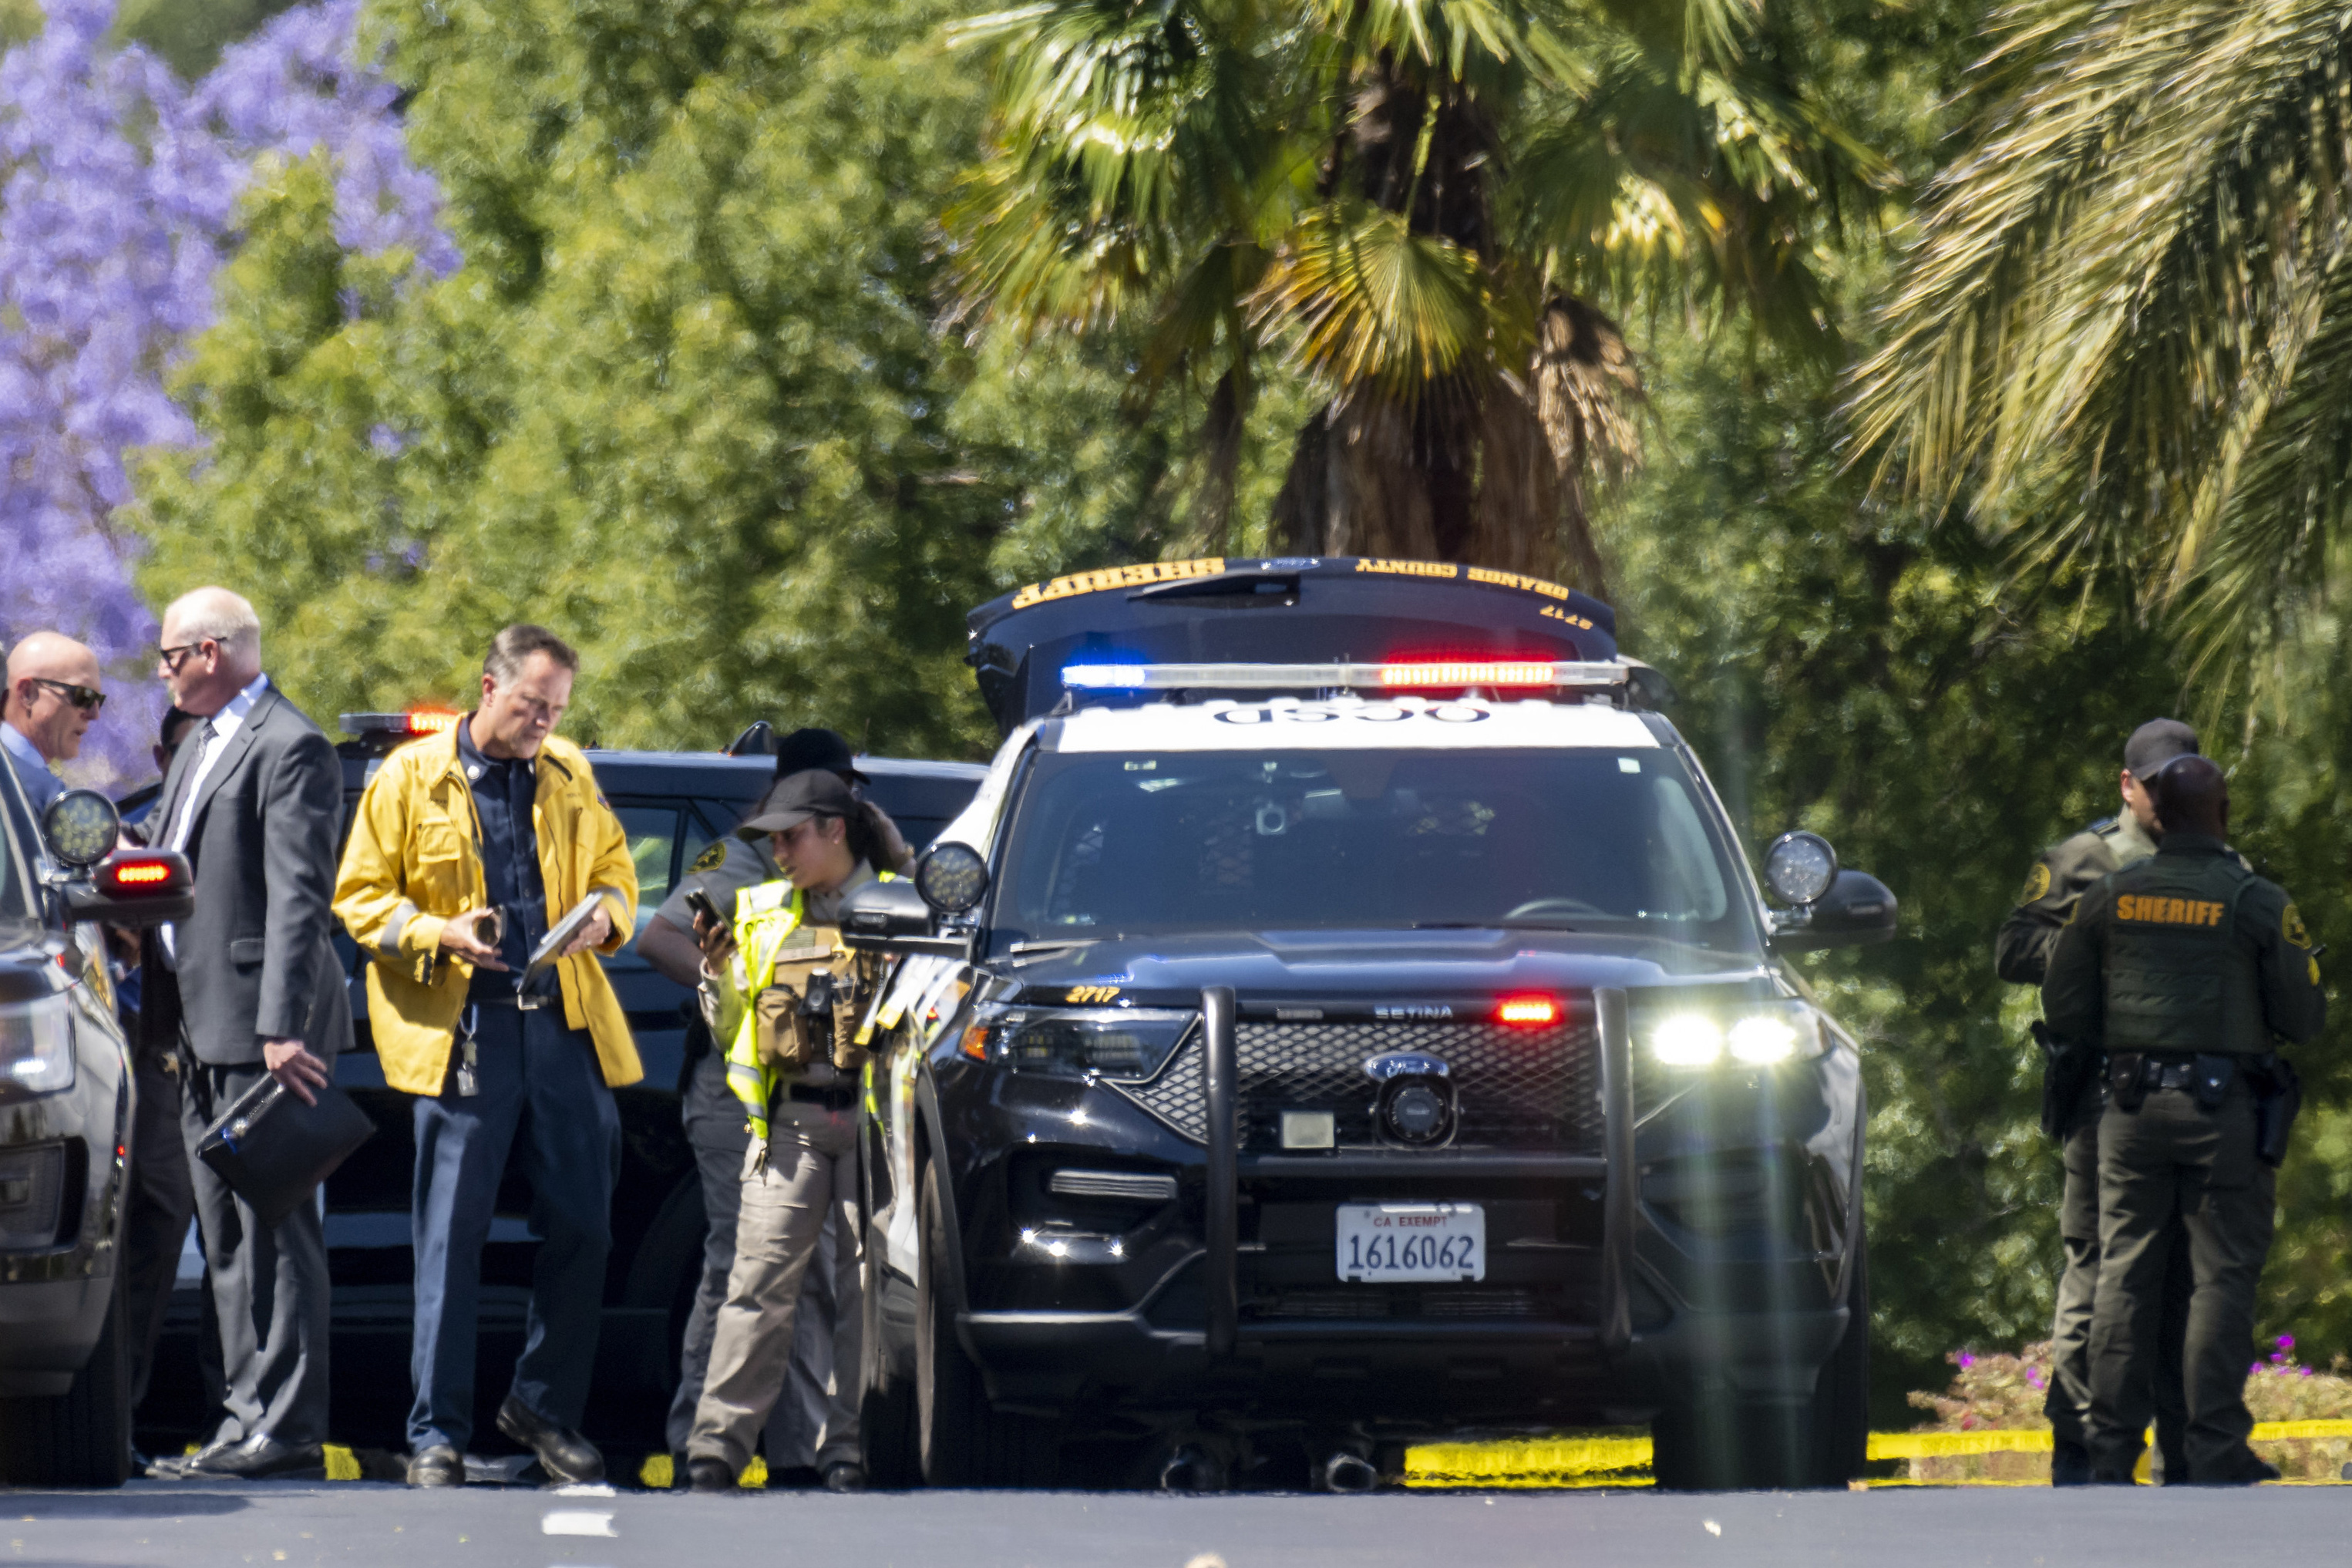 “This group of parishioners displayed what we believe to be exceptional heroism and bravery in intervening to apprehend the suspect.  They certainly avoided additional injuries and deaths,” the county deputy said.  (Leonard Ortiz/The Orange County Register via AP)